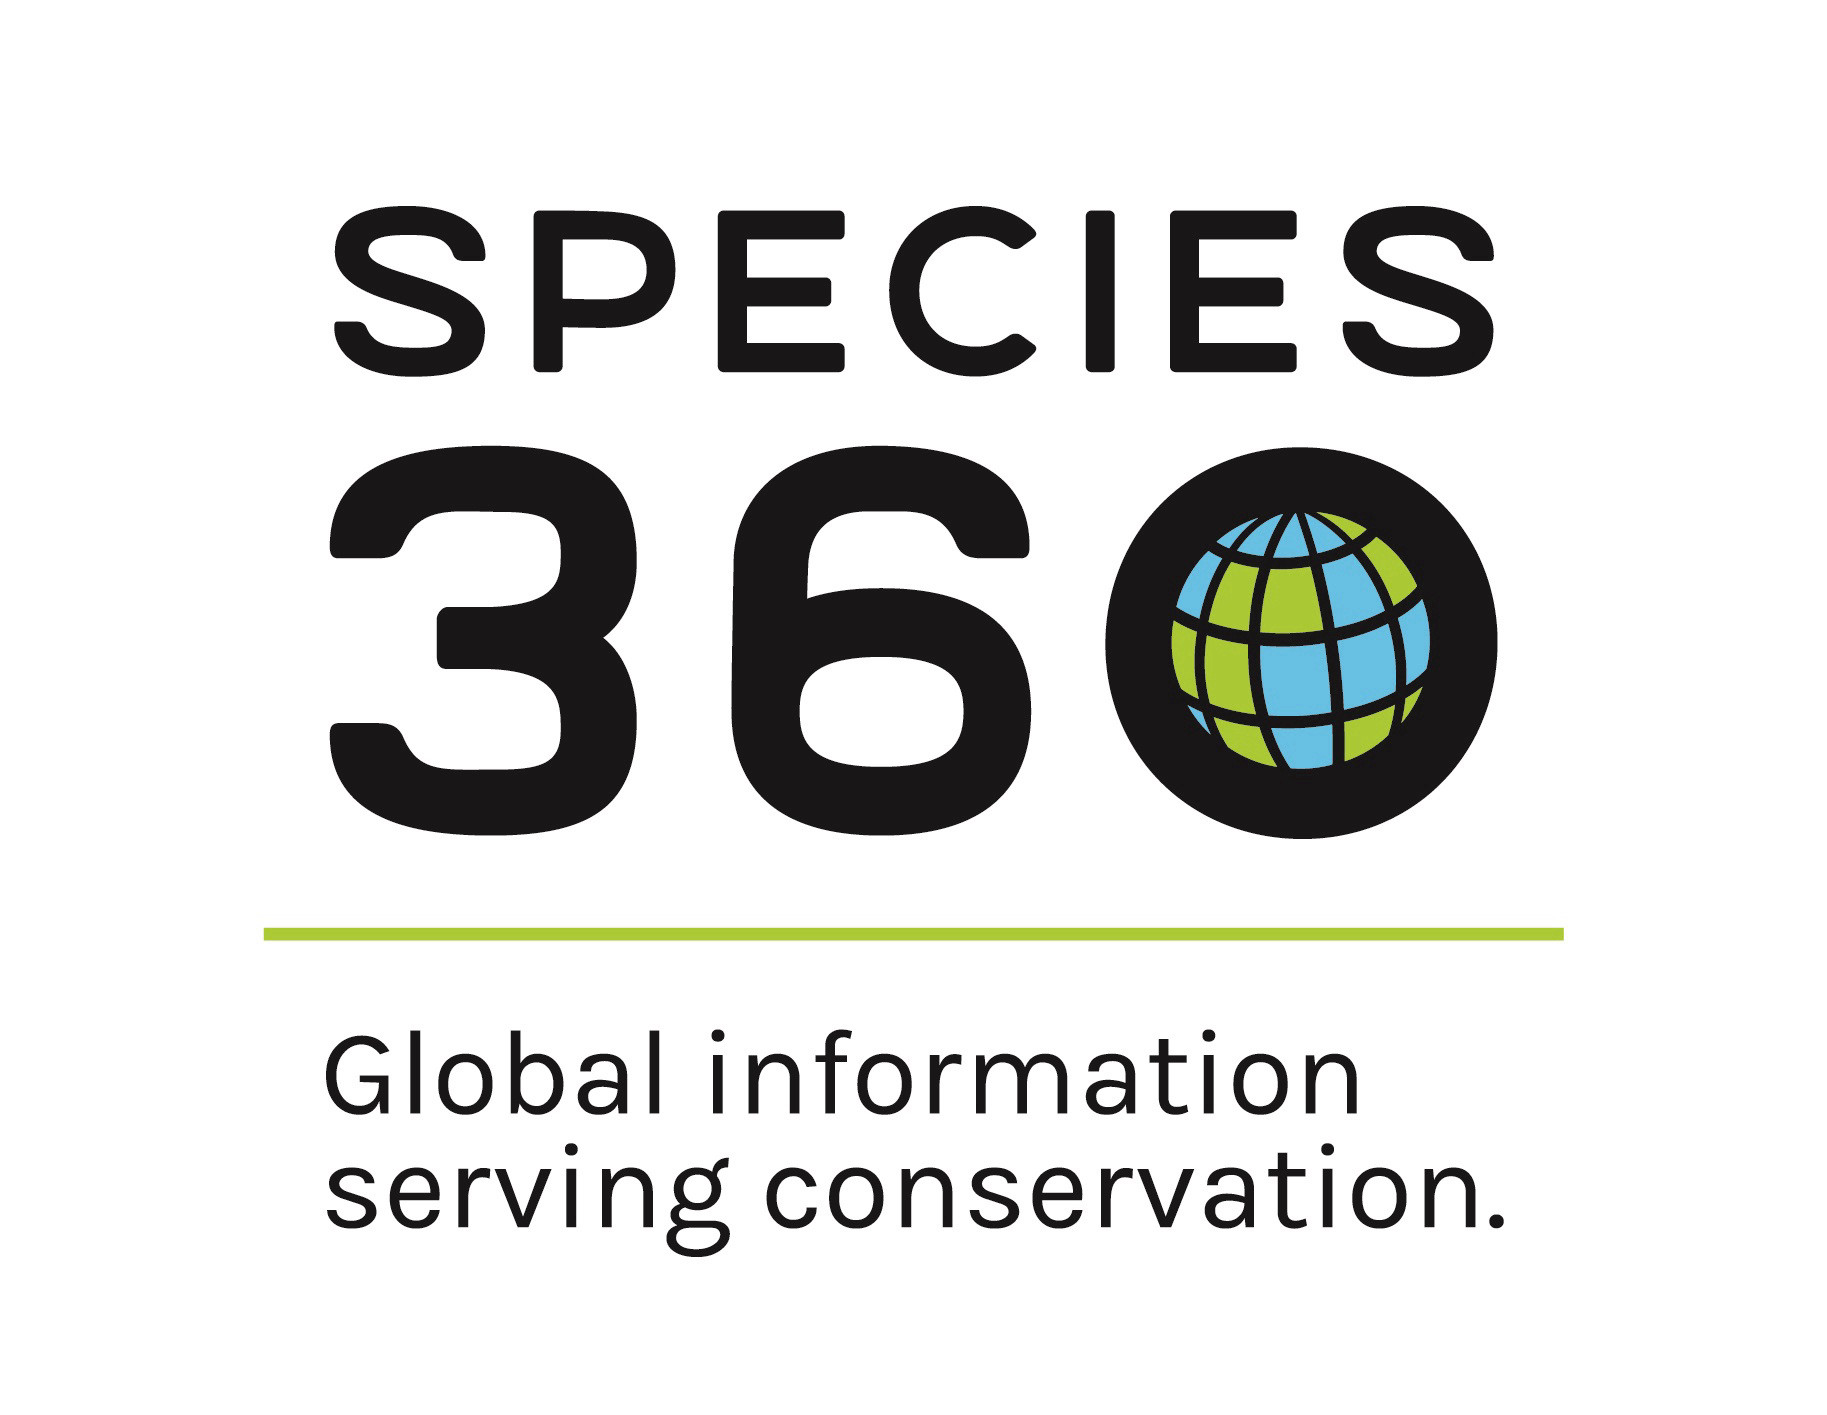 Species360 logo with stylized globe in the zero. Text below: Global information serving conservation.